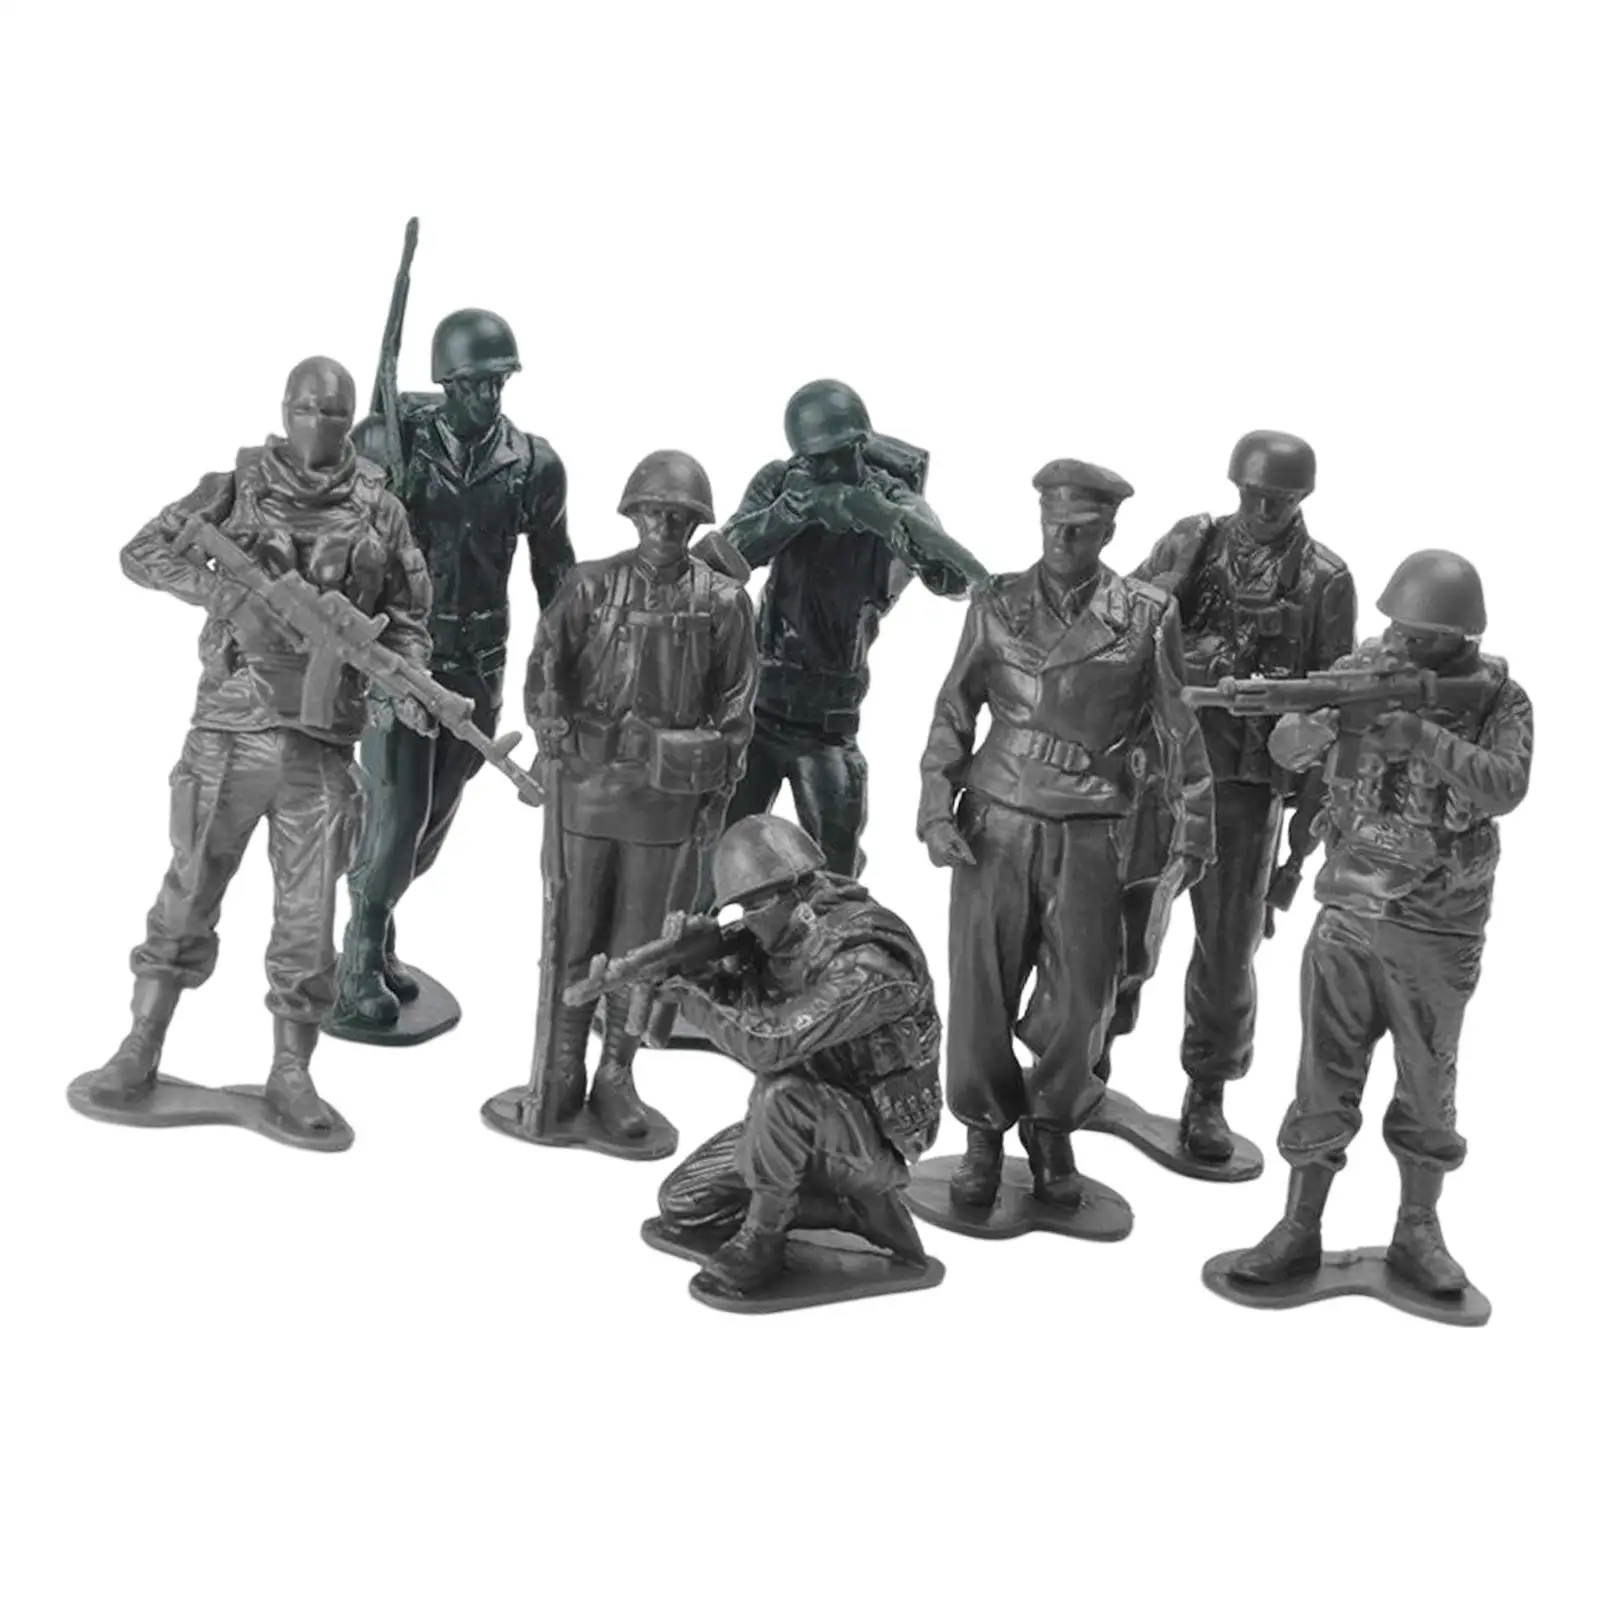 8 Pieces 1:18 Scale Action Figure Toy Soldiers Playset Diorama for Boys Kids